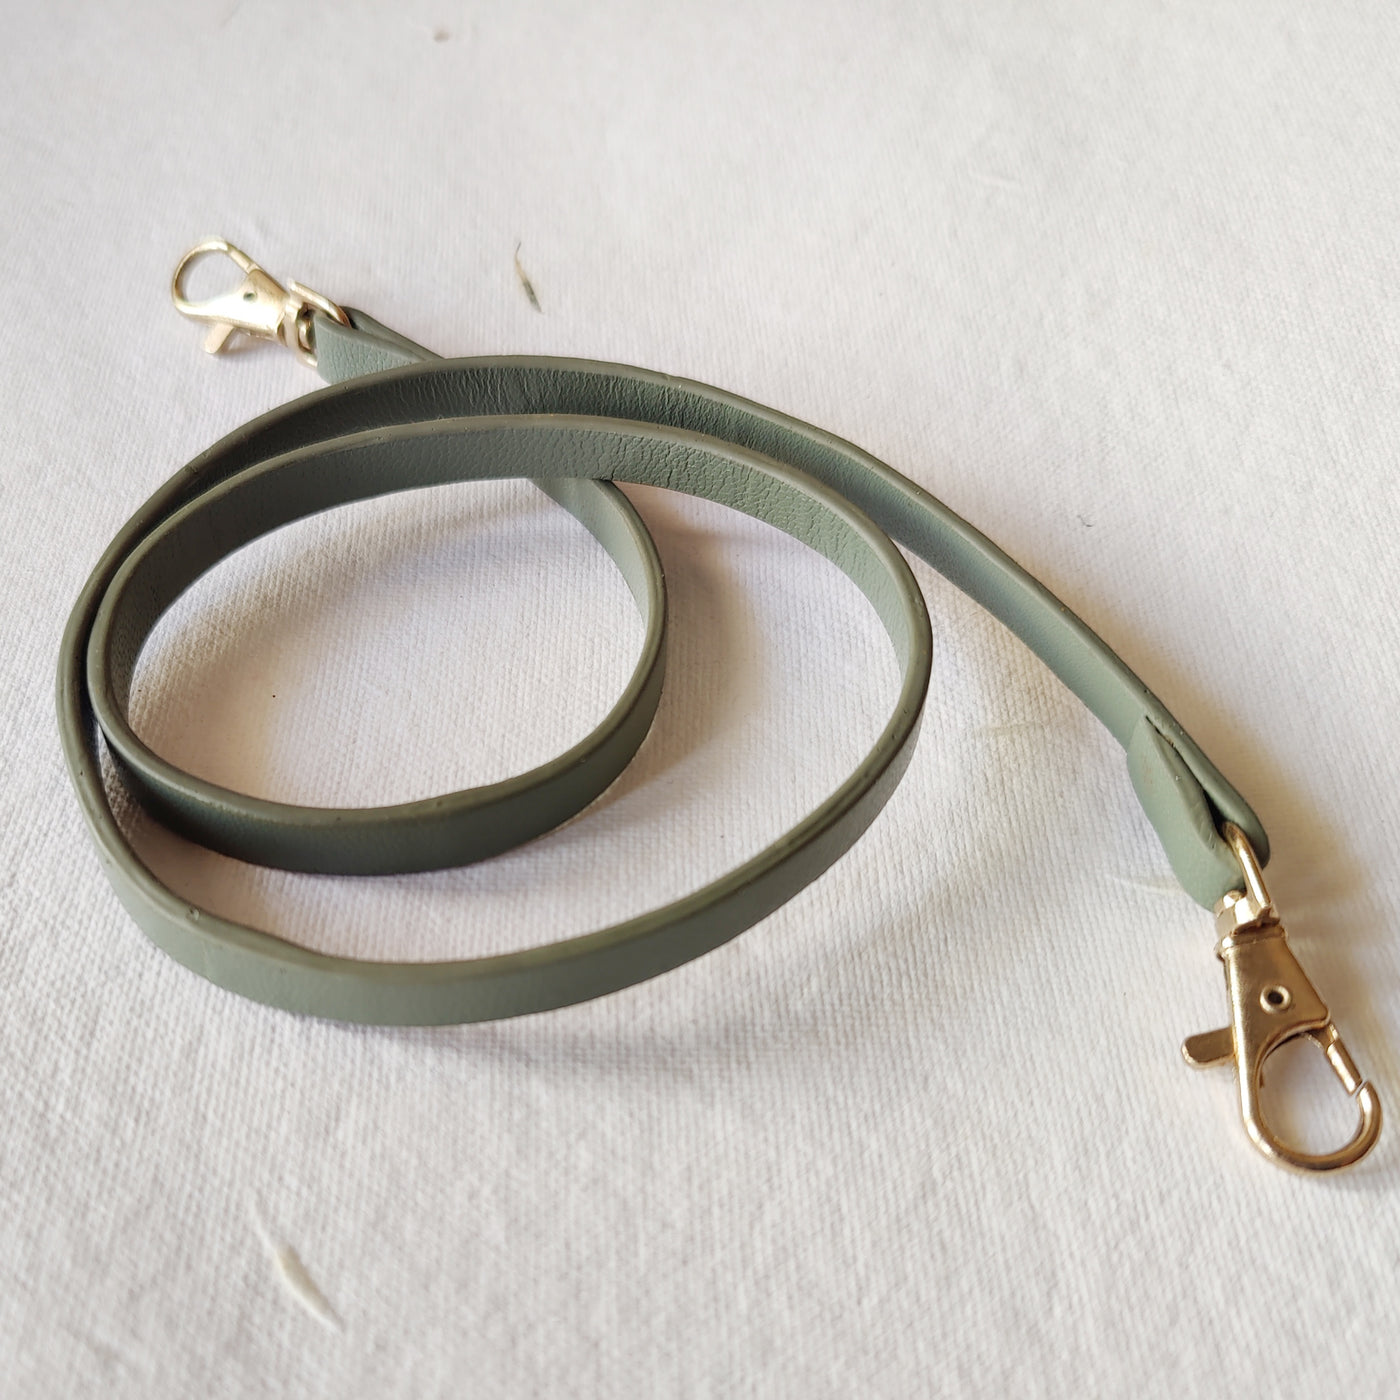 Sap Green Leather Mask Chain